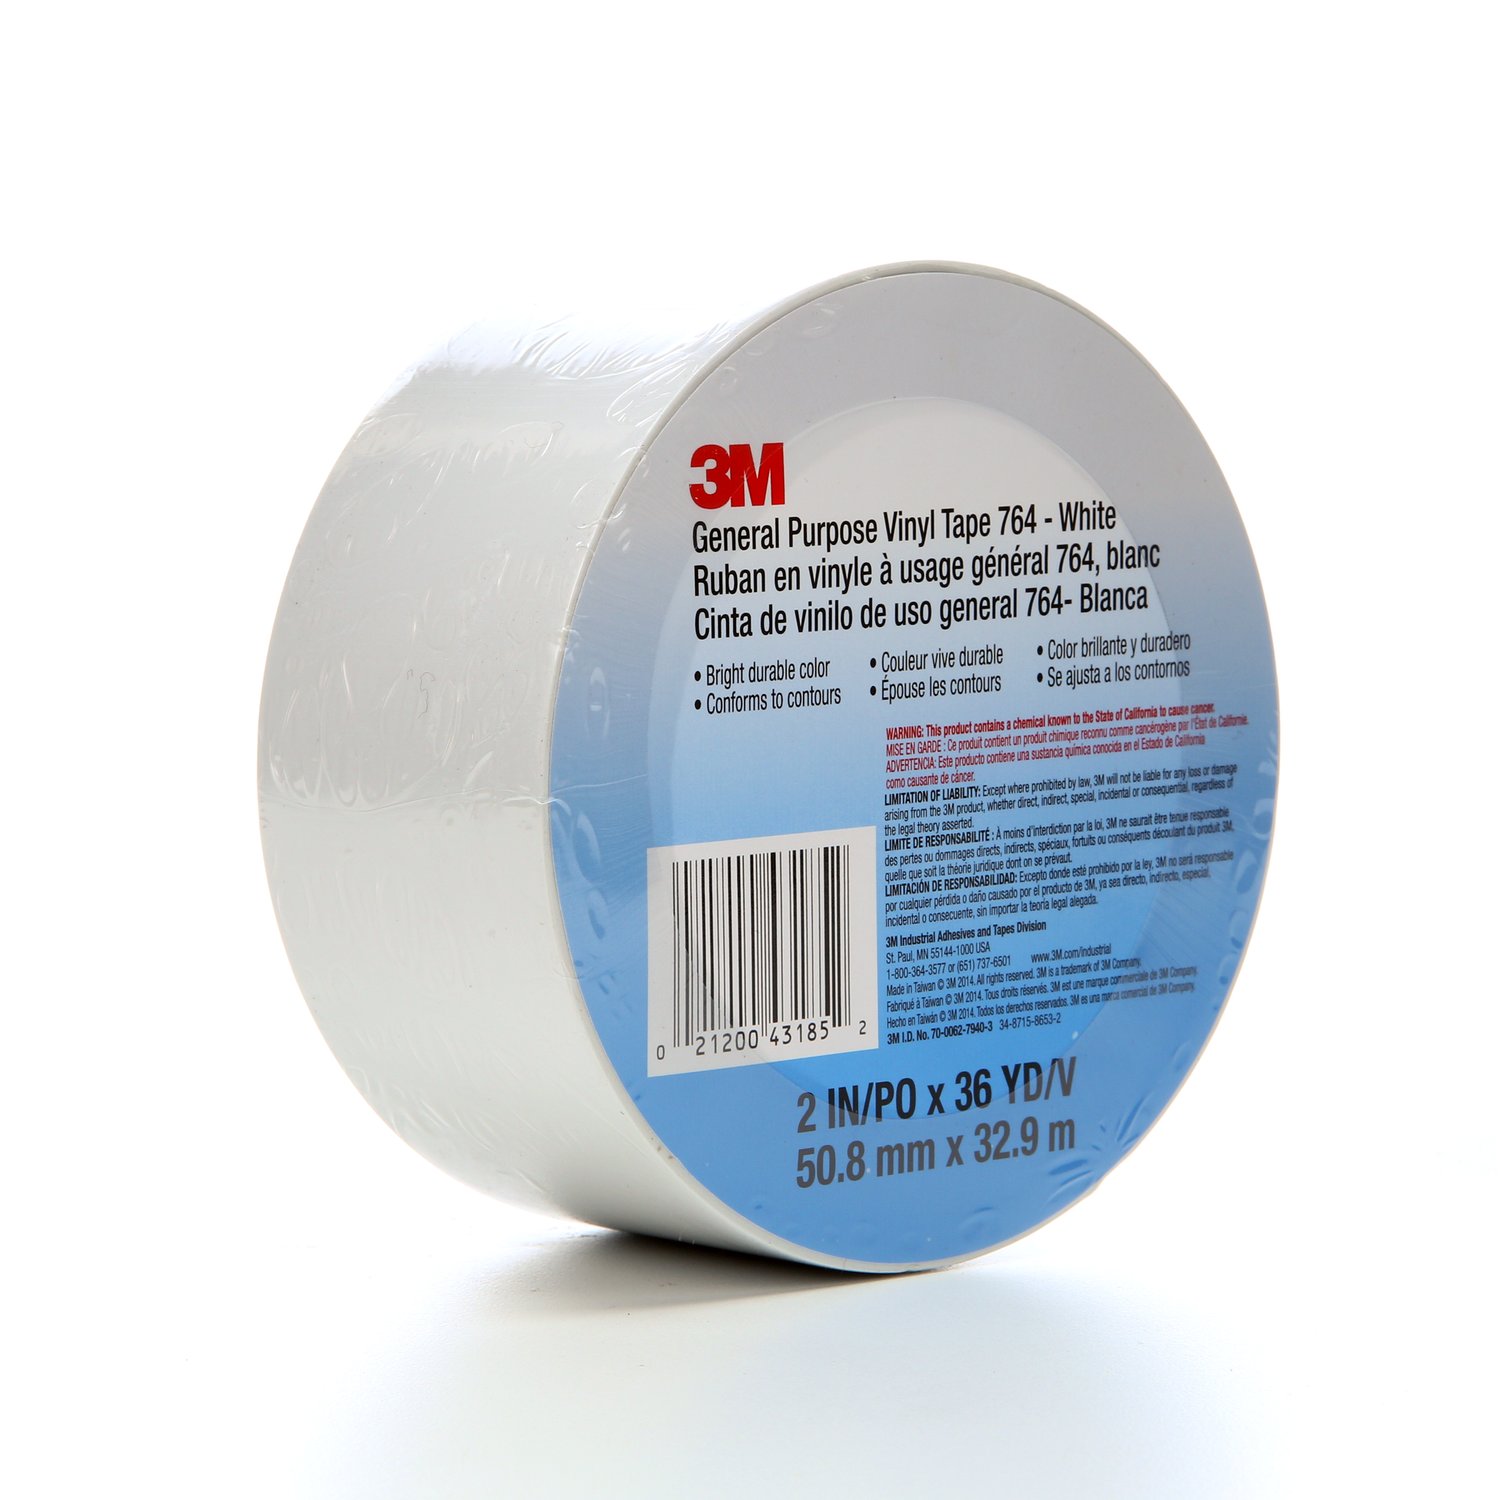 7000028956 - 3M General Purpose Vinyl Tape 764, White, 2 in x 36 yd, 5 mil, 24 Roll/Case, Individually Wrapped Conveniently Packaged